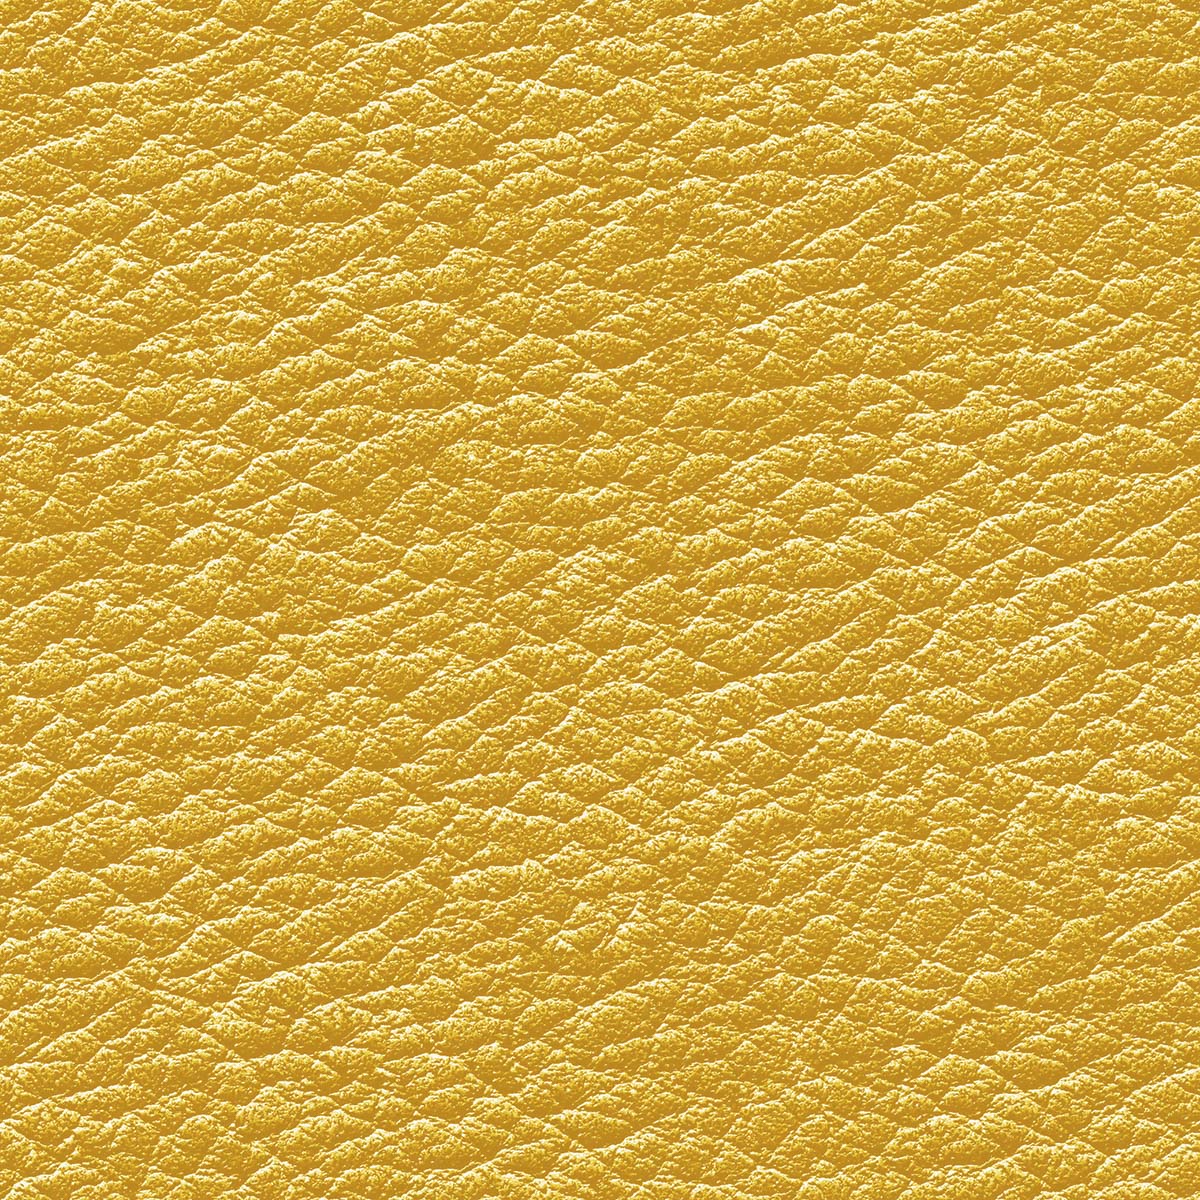 A close up of a yellow leather